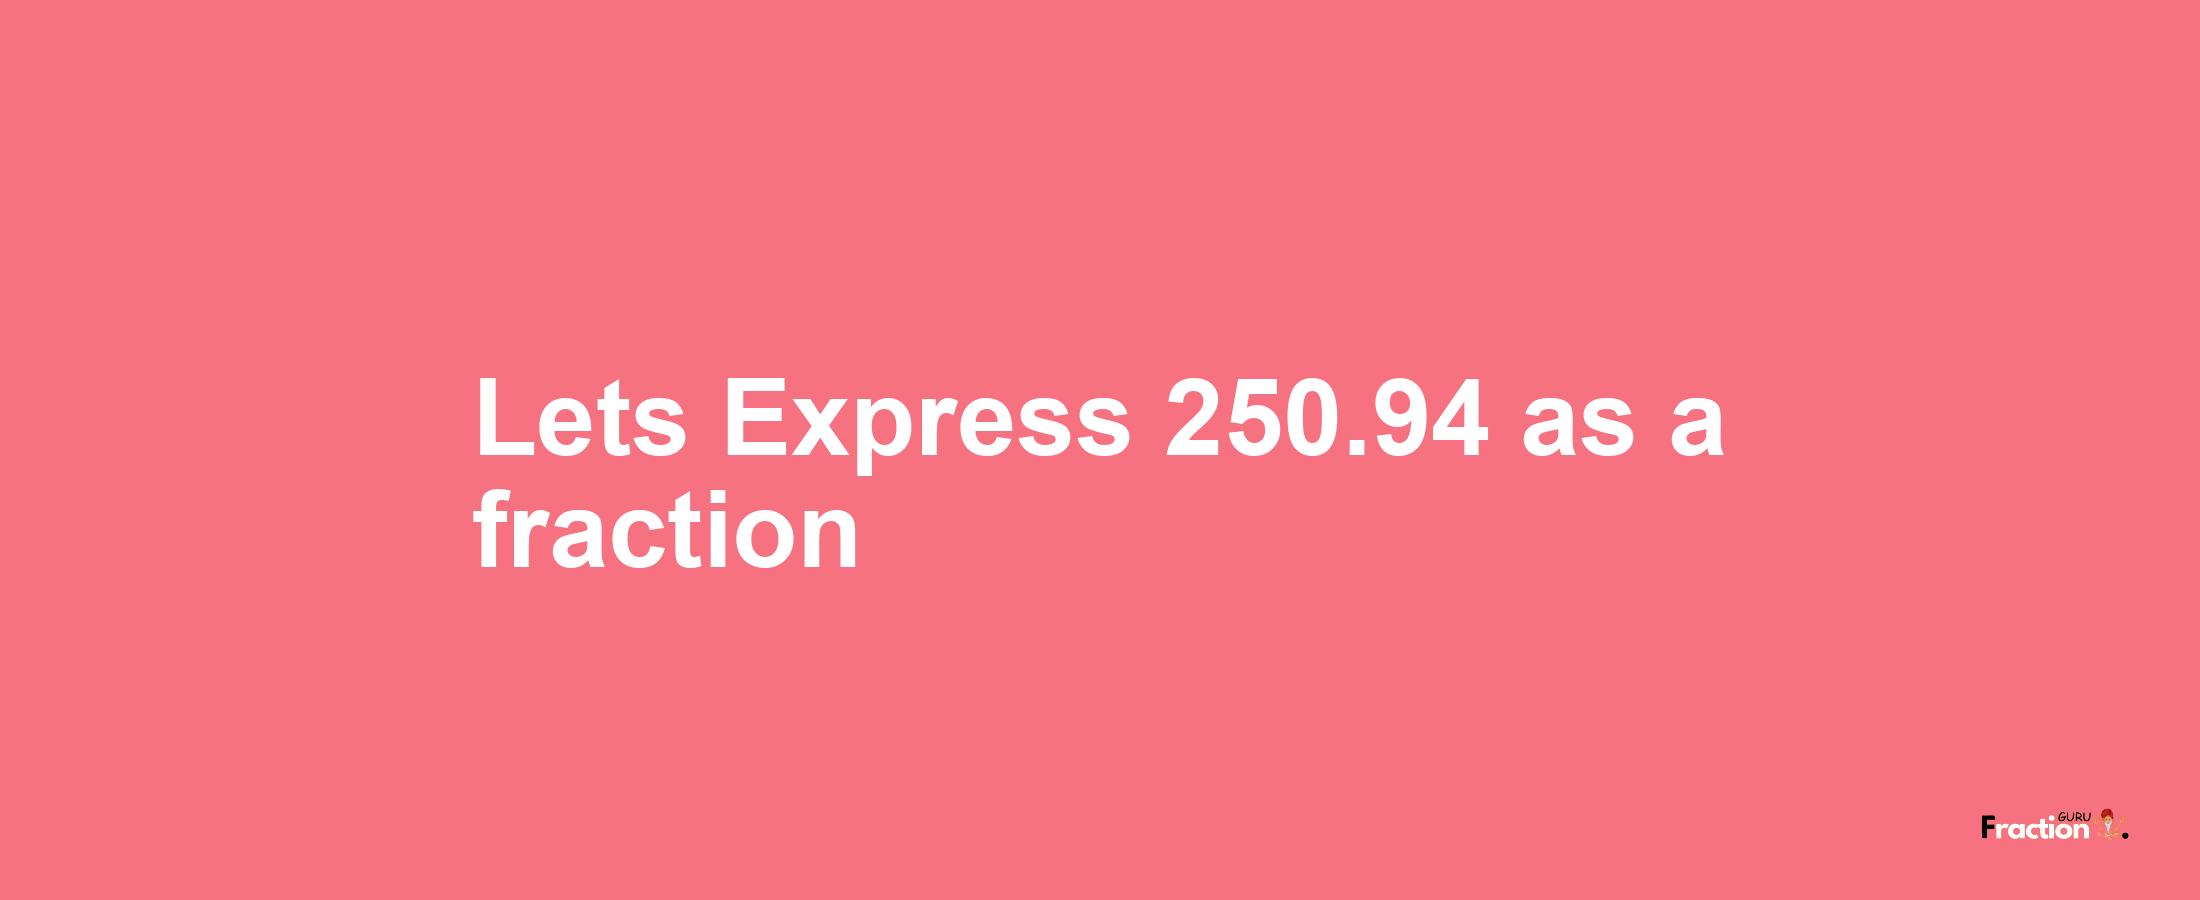 Lets Express 250.94 as afraction